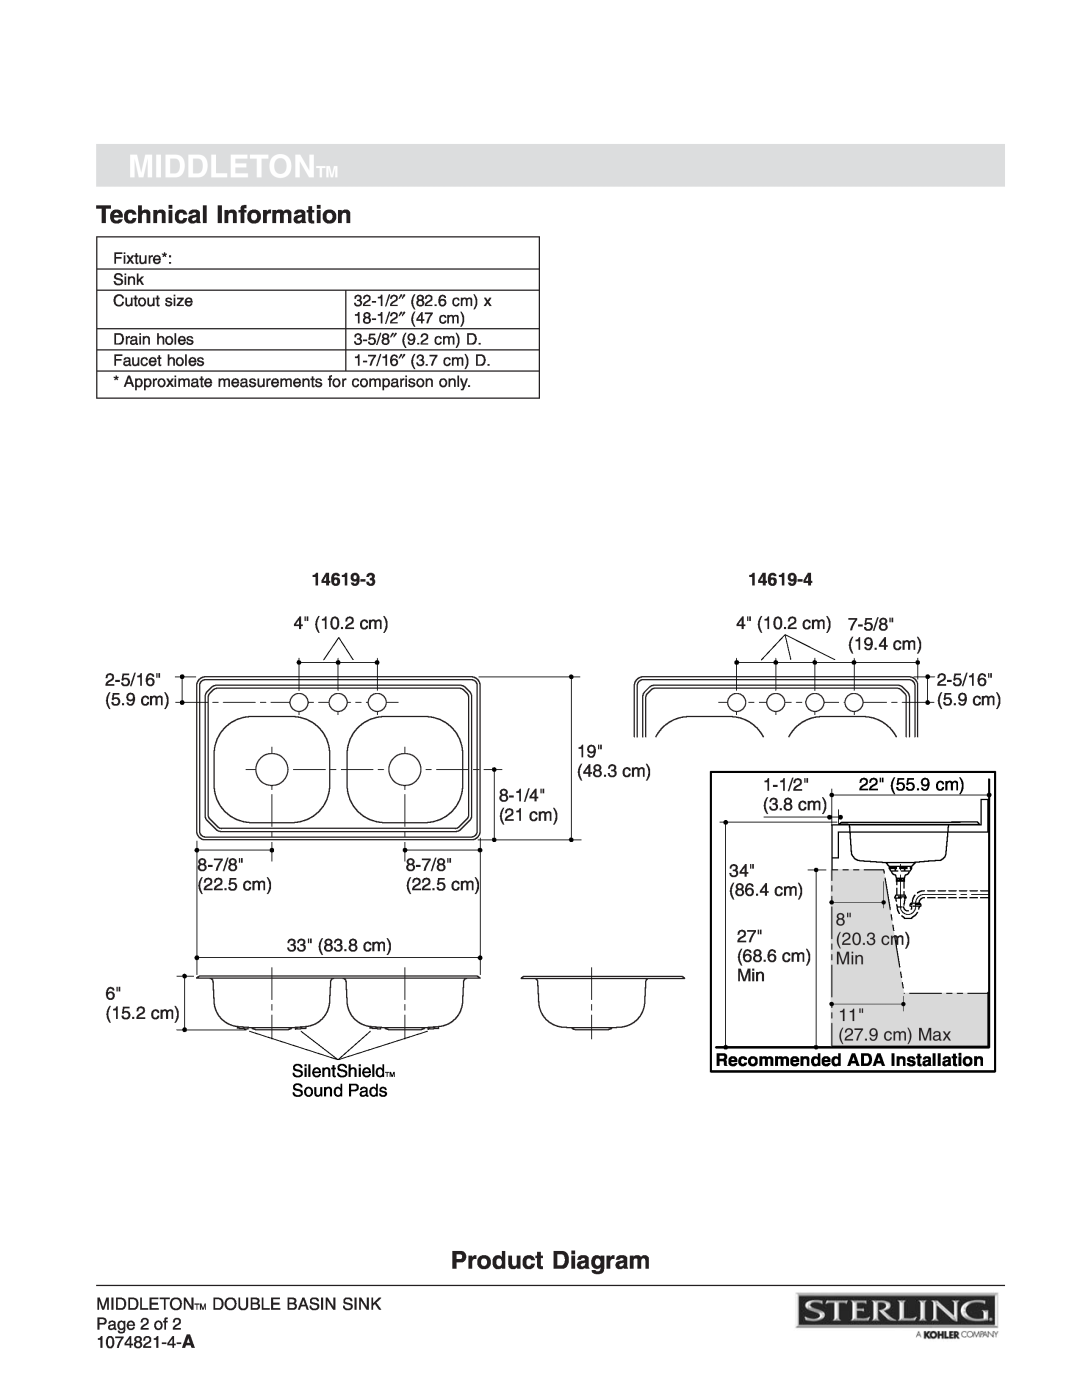 Sterling Plumbing 14619-3 Technical Information, Product Diagram, Middletontm, 14619-4, Recommended ADA Installation 